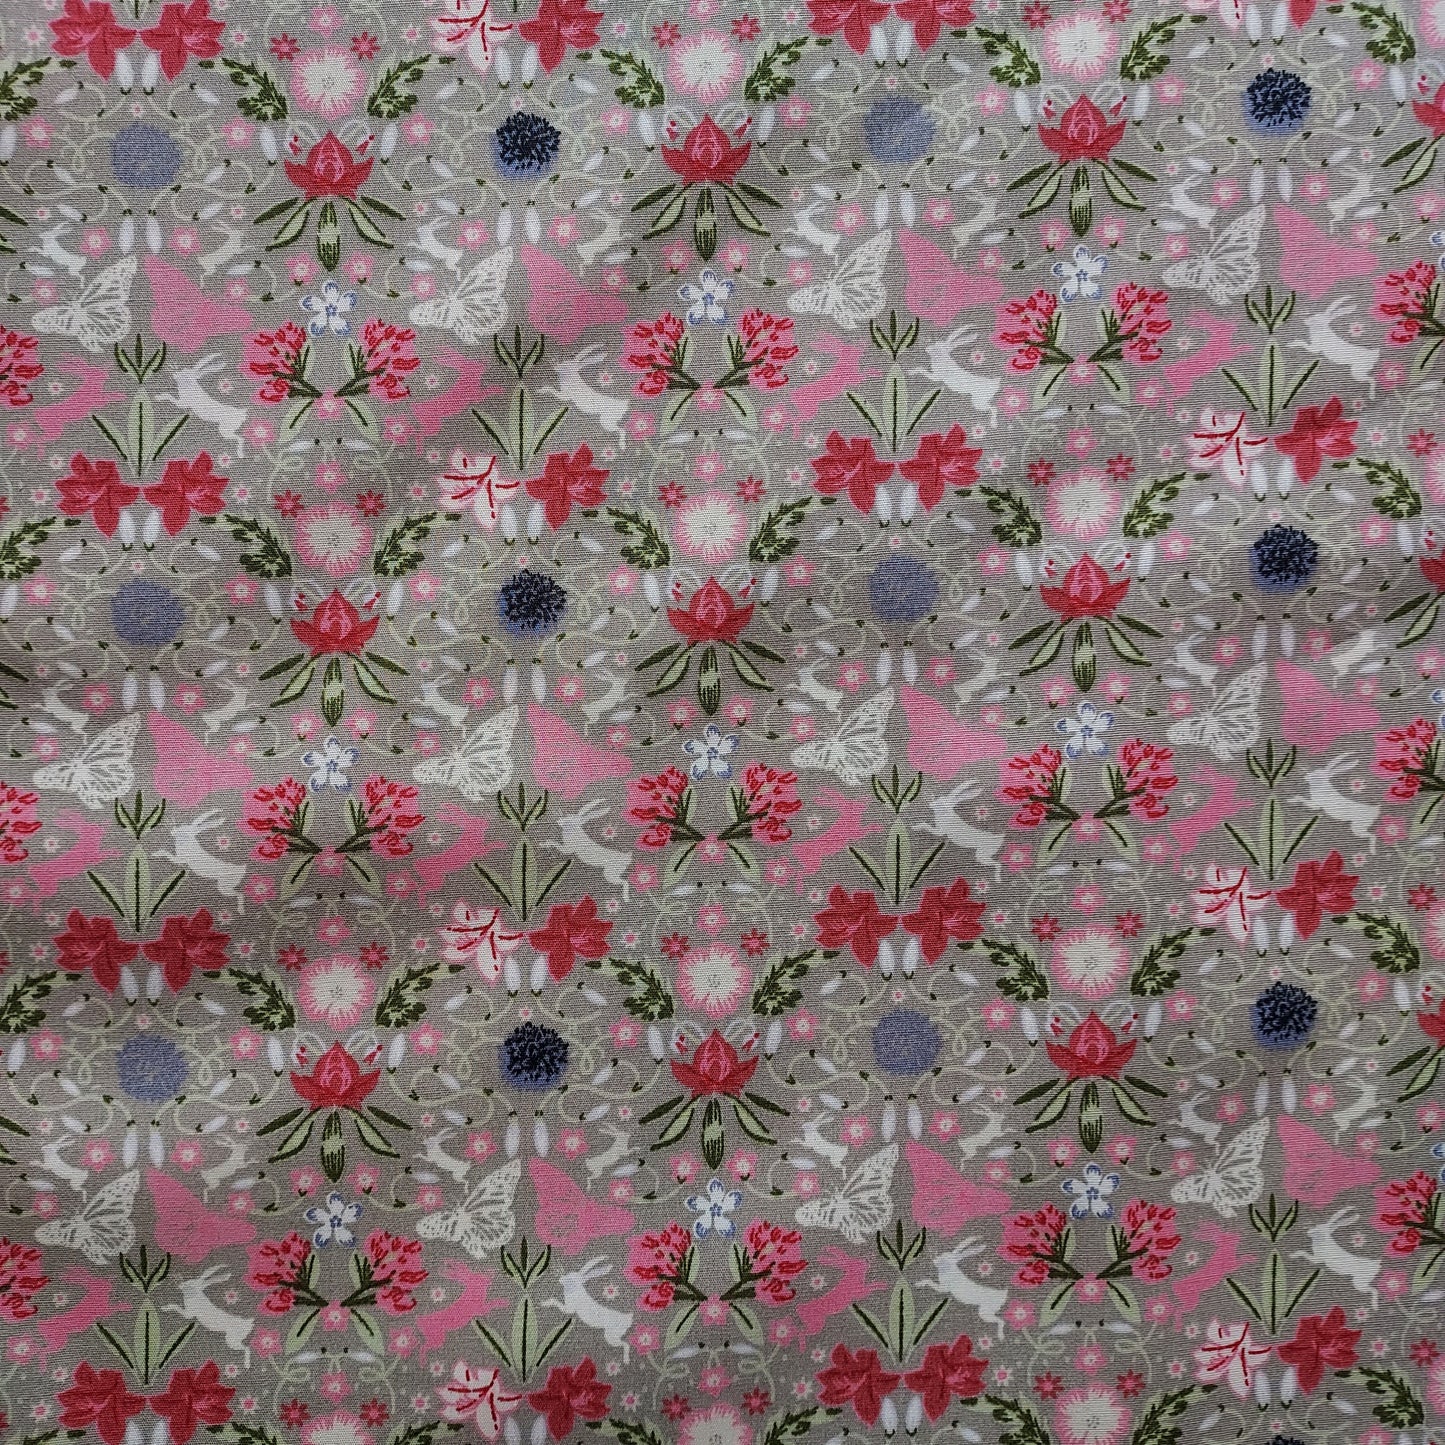 Flowers Butterflies and Rabbits Cotton Fabric